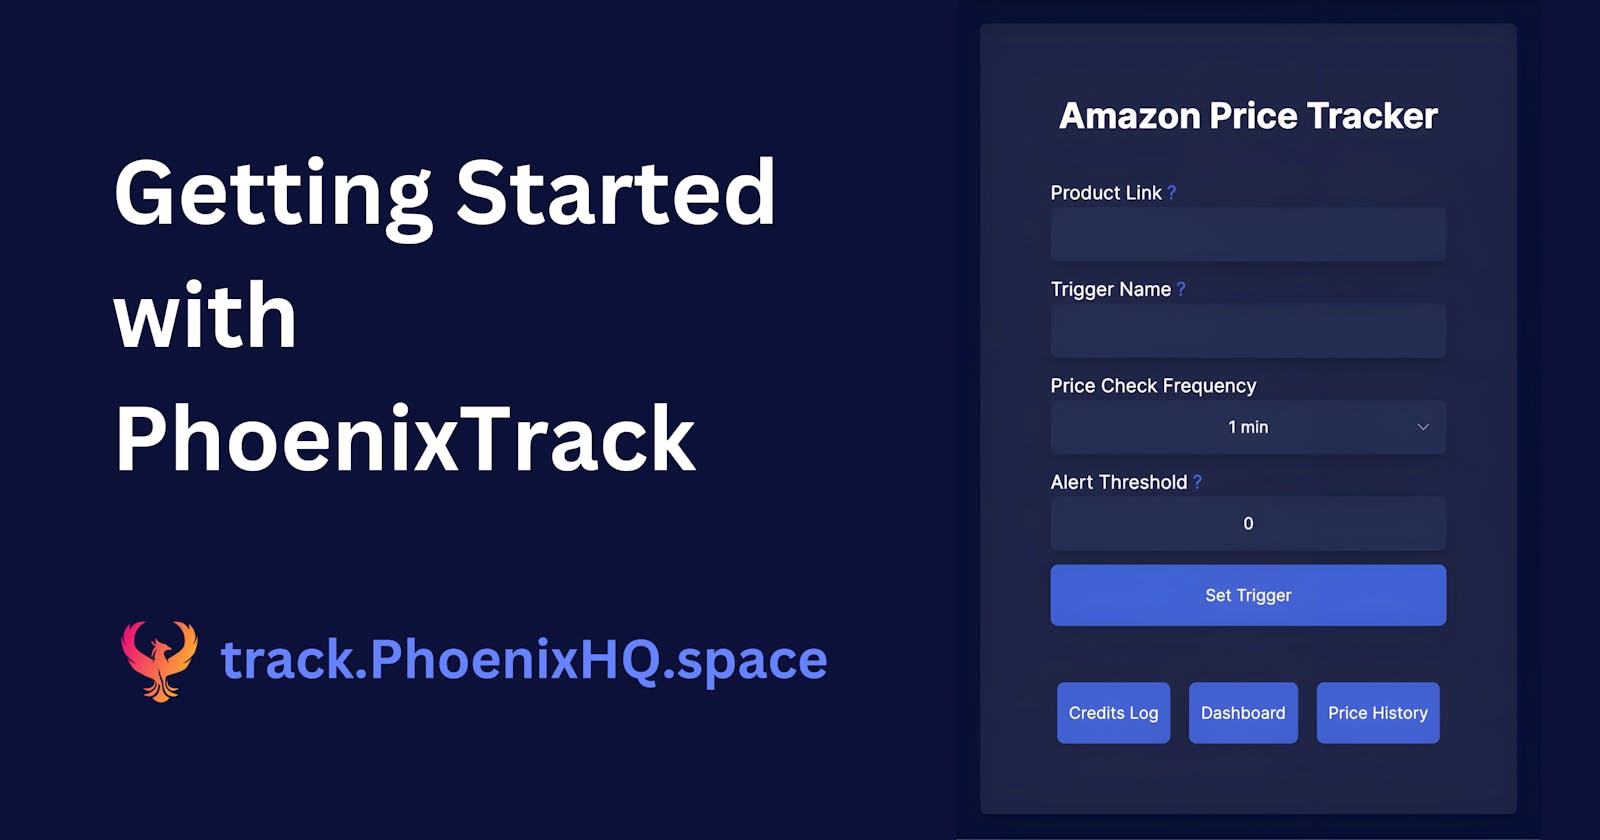 Getting Started with PhoenixTrack